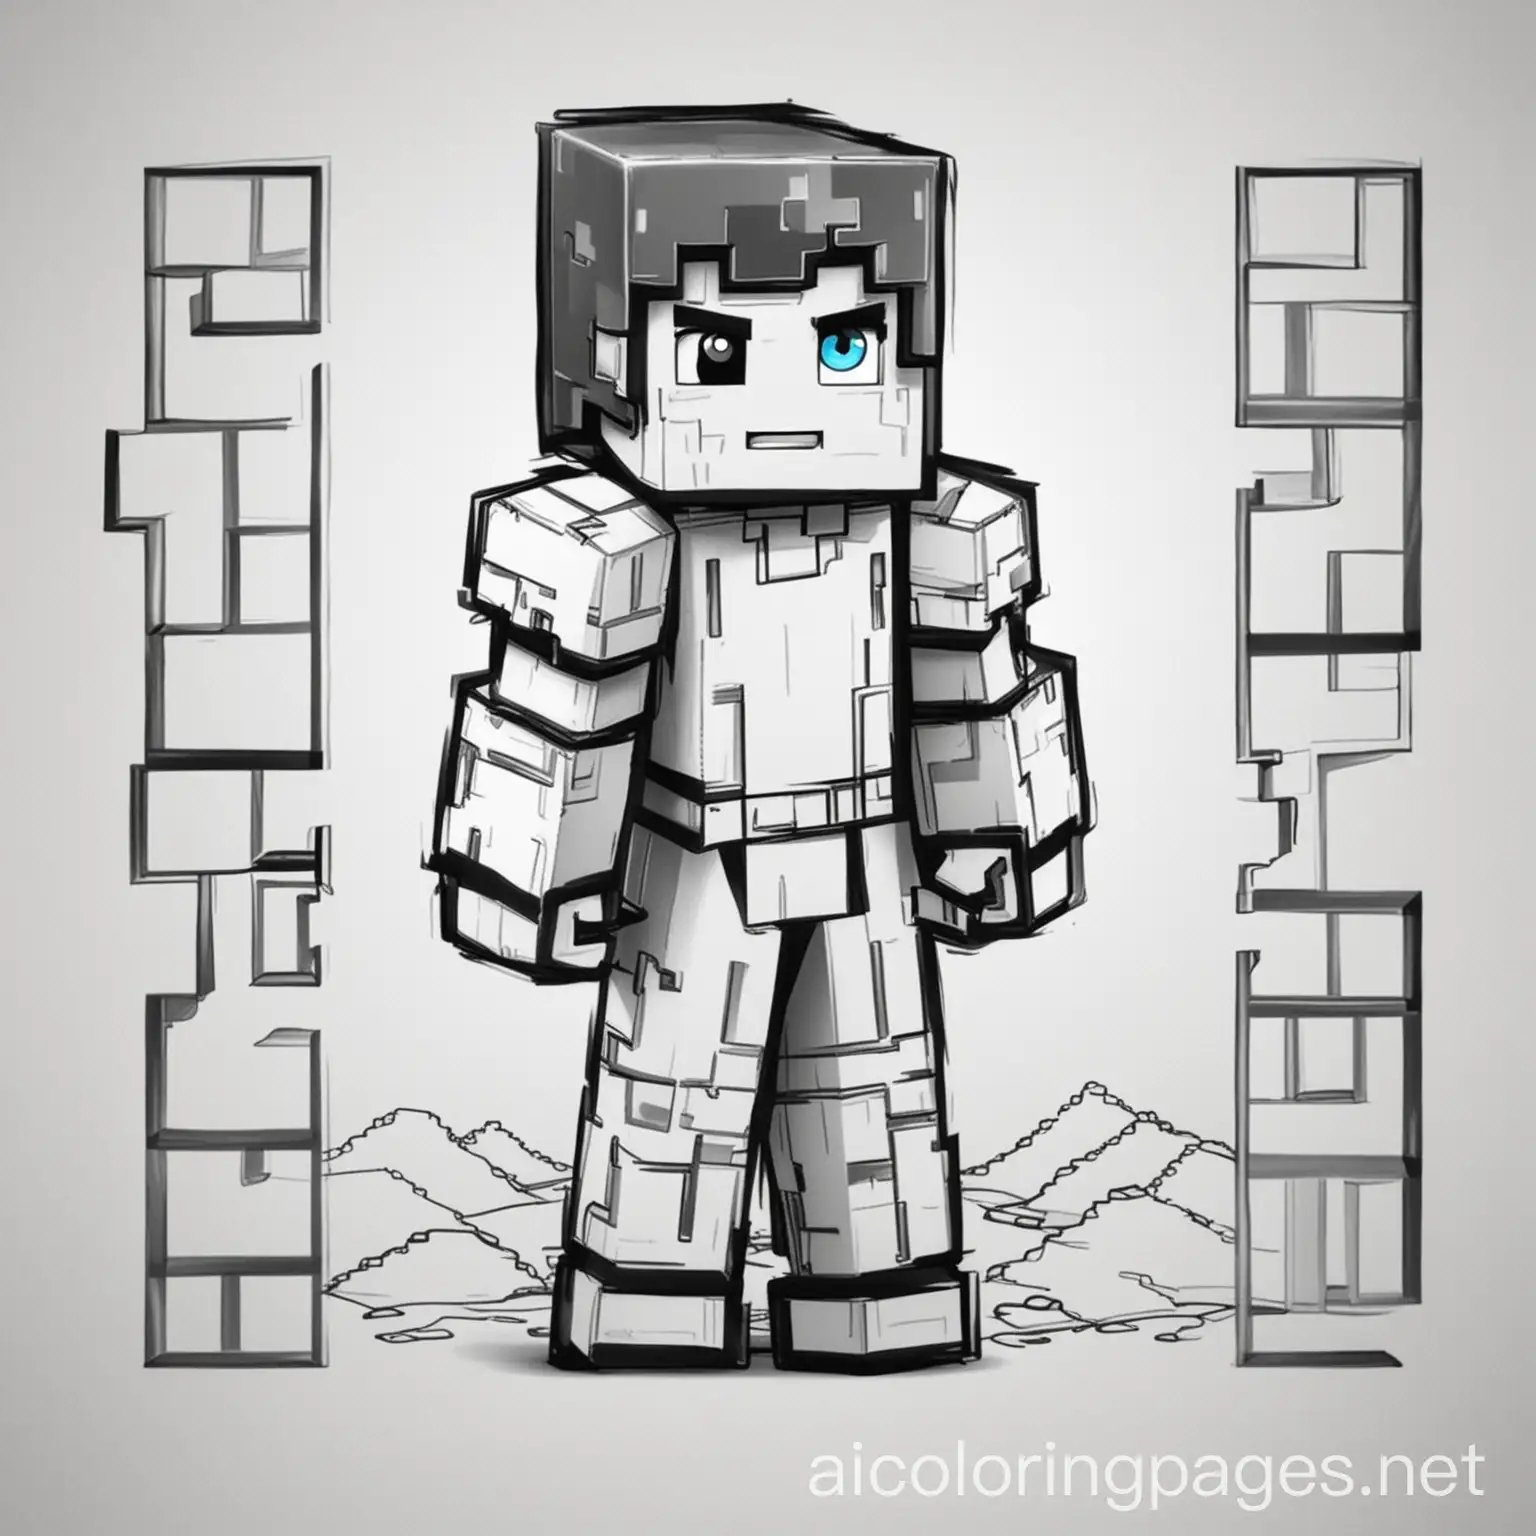 Minecraft , Coloring Page, black and white, line art, white background, Simplicity, Ample White Space. The background of the coloring page is plain white to make it easy for young children to color within the lines. The outlines of all the subjects are easy to distinguish, making it simple for kids to color without too much difficulty